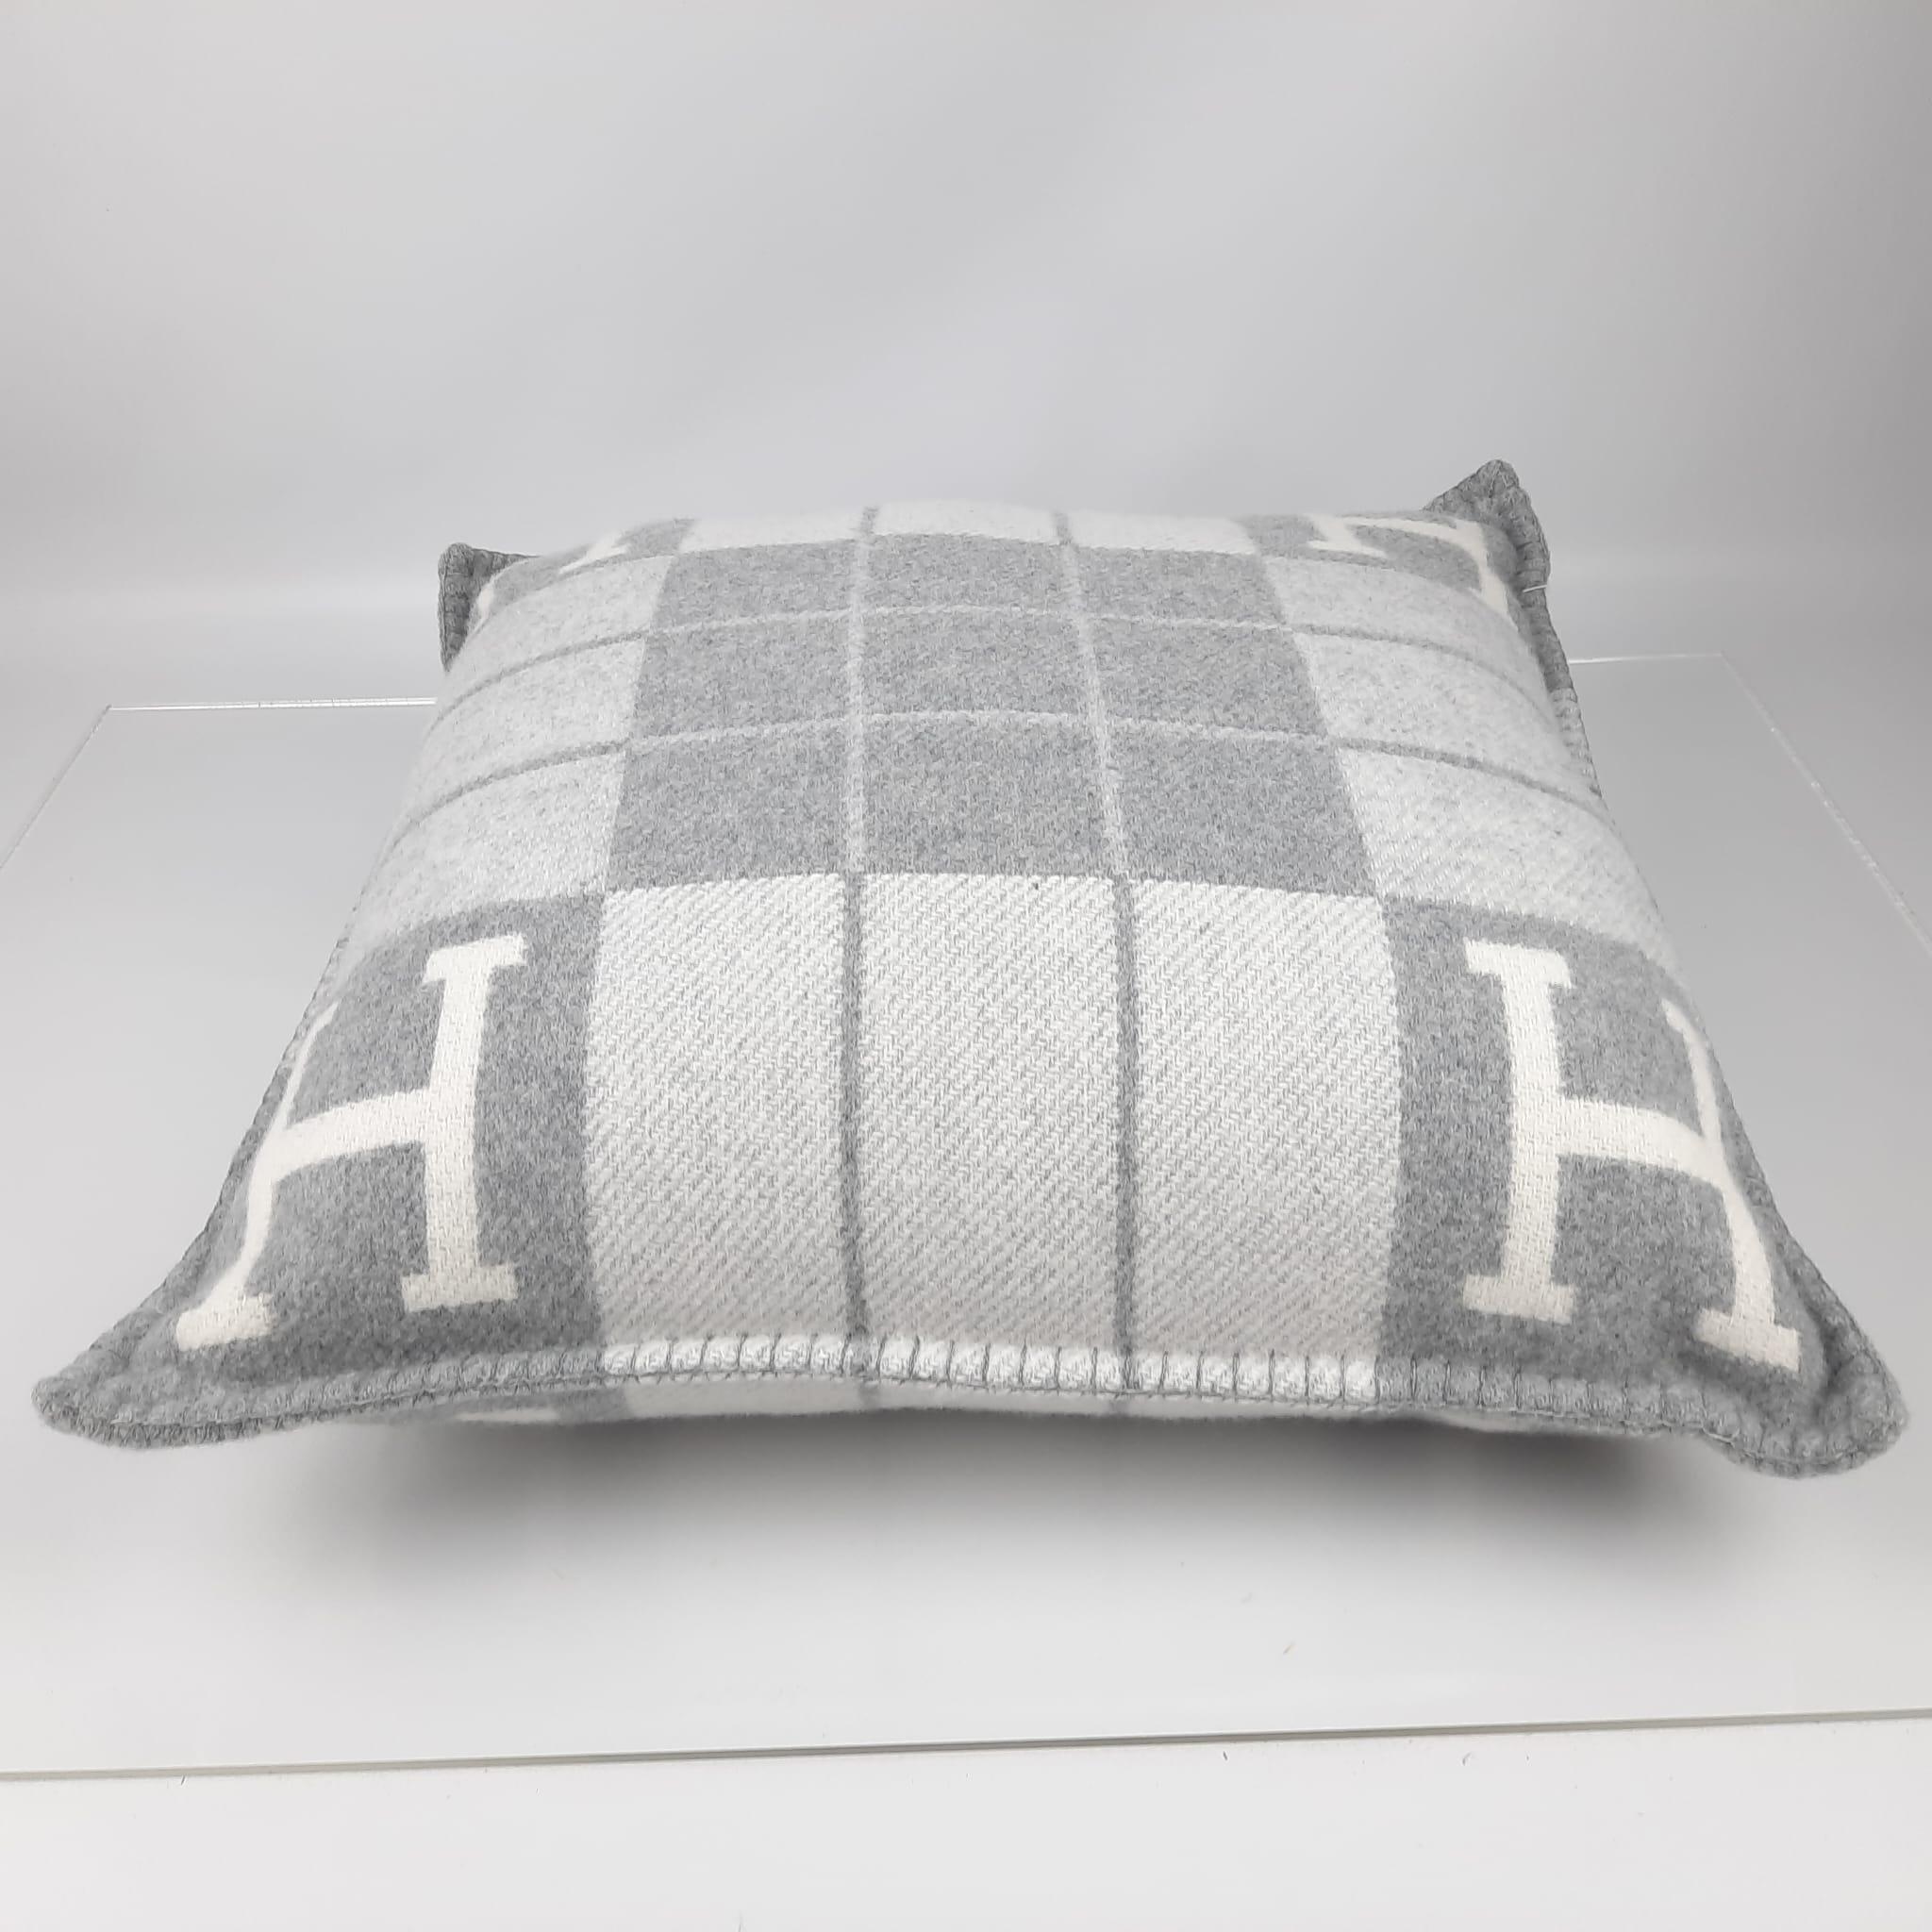 Pillow with removable cover in jacquard woven wool and cashmere. Hypoallergenic polyester filling. Finished with blanket stitch. Dimensions: L 50 x H 50 cm. 
sku 11368